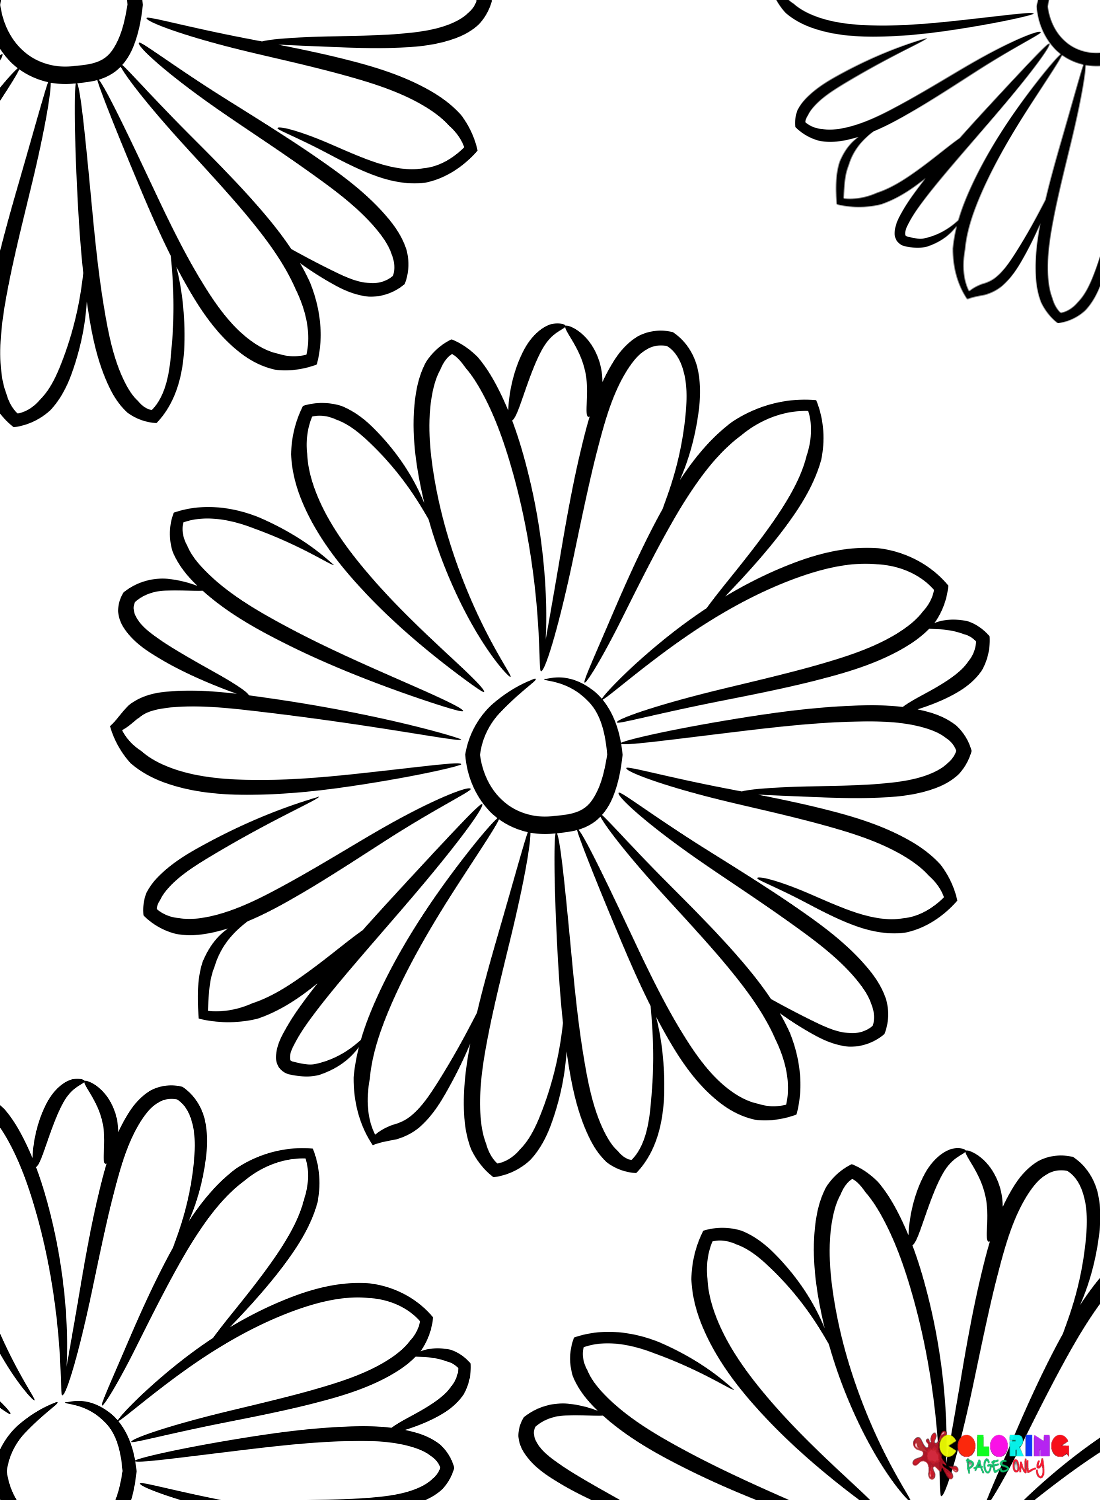 Free Flower Daisy Coloring Page